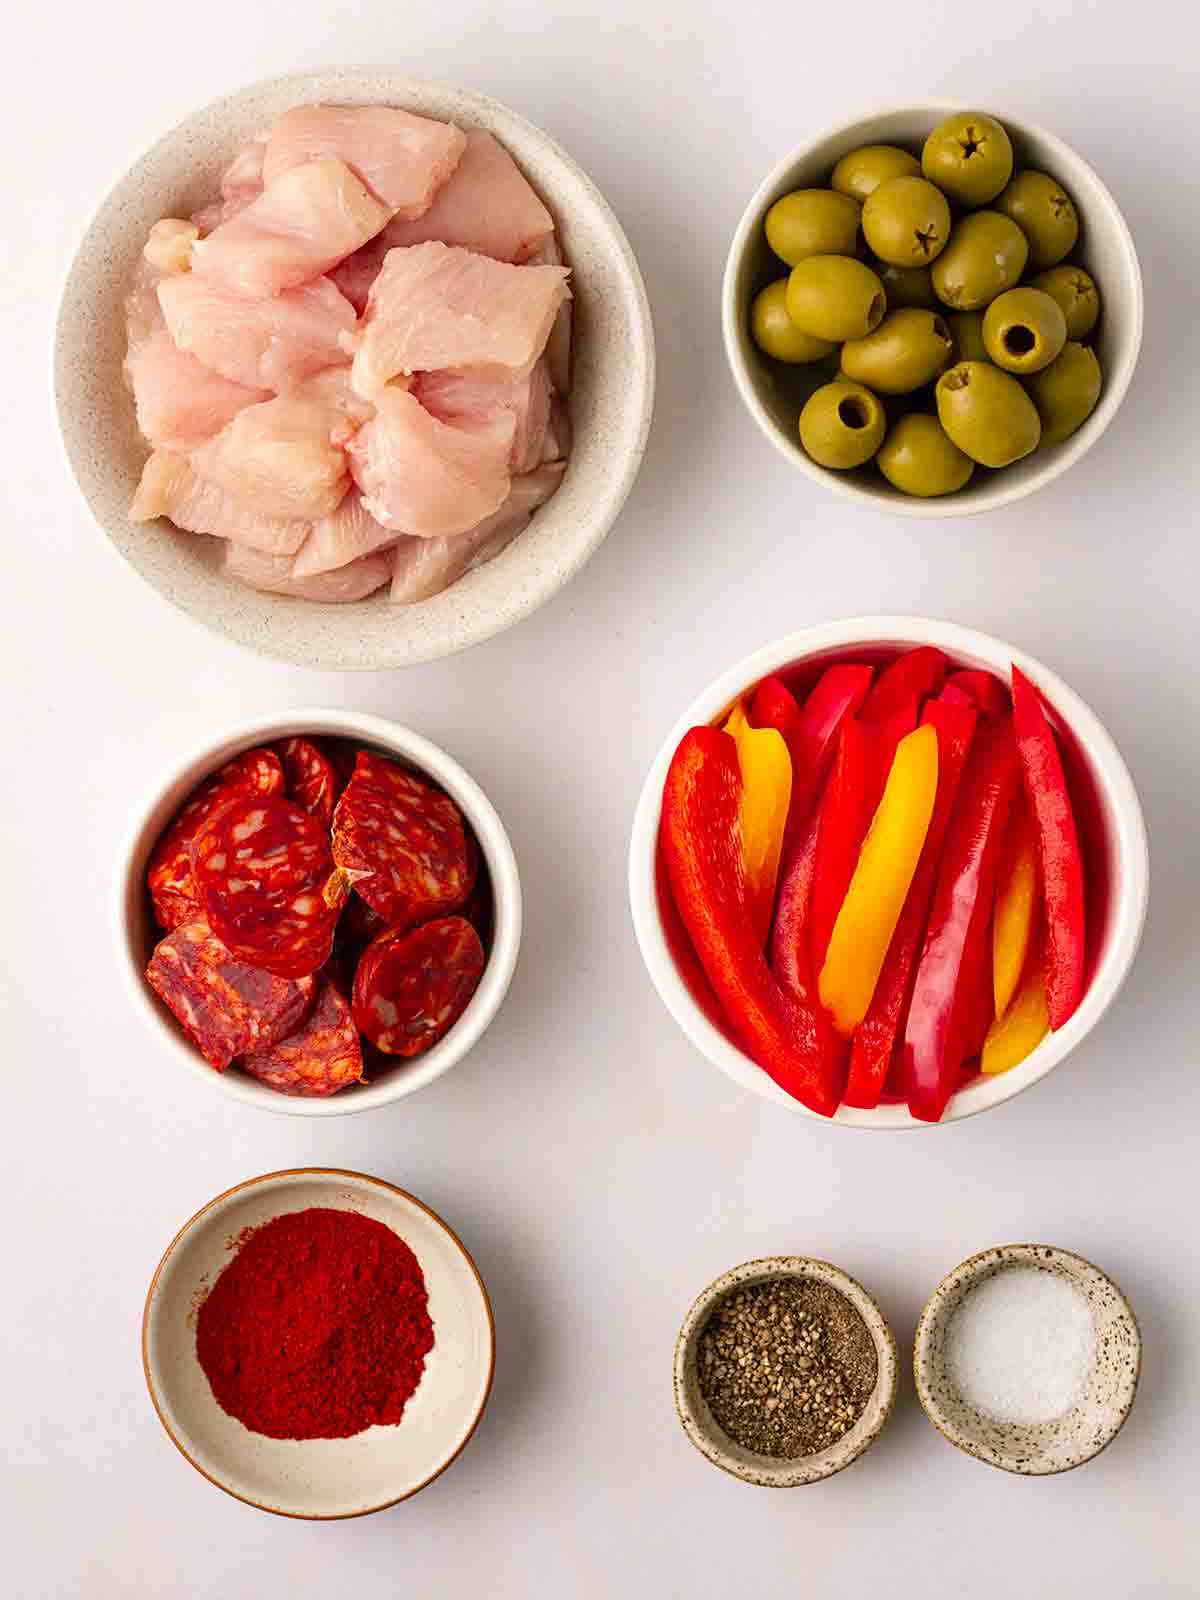 The ingredients for air fryer Spanish chicken chopped and put into bowls on a white counter.